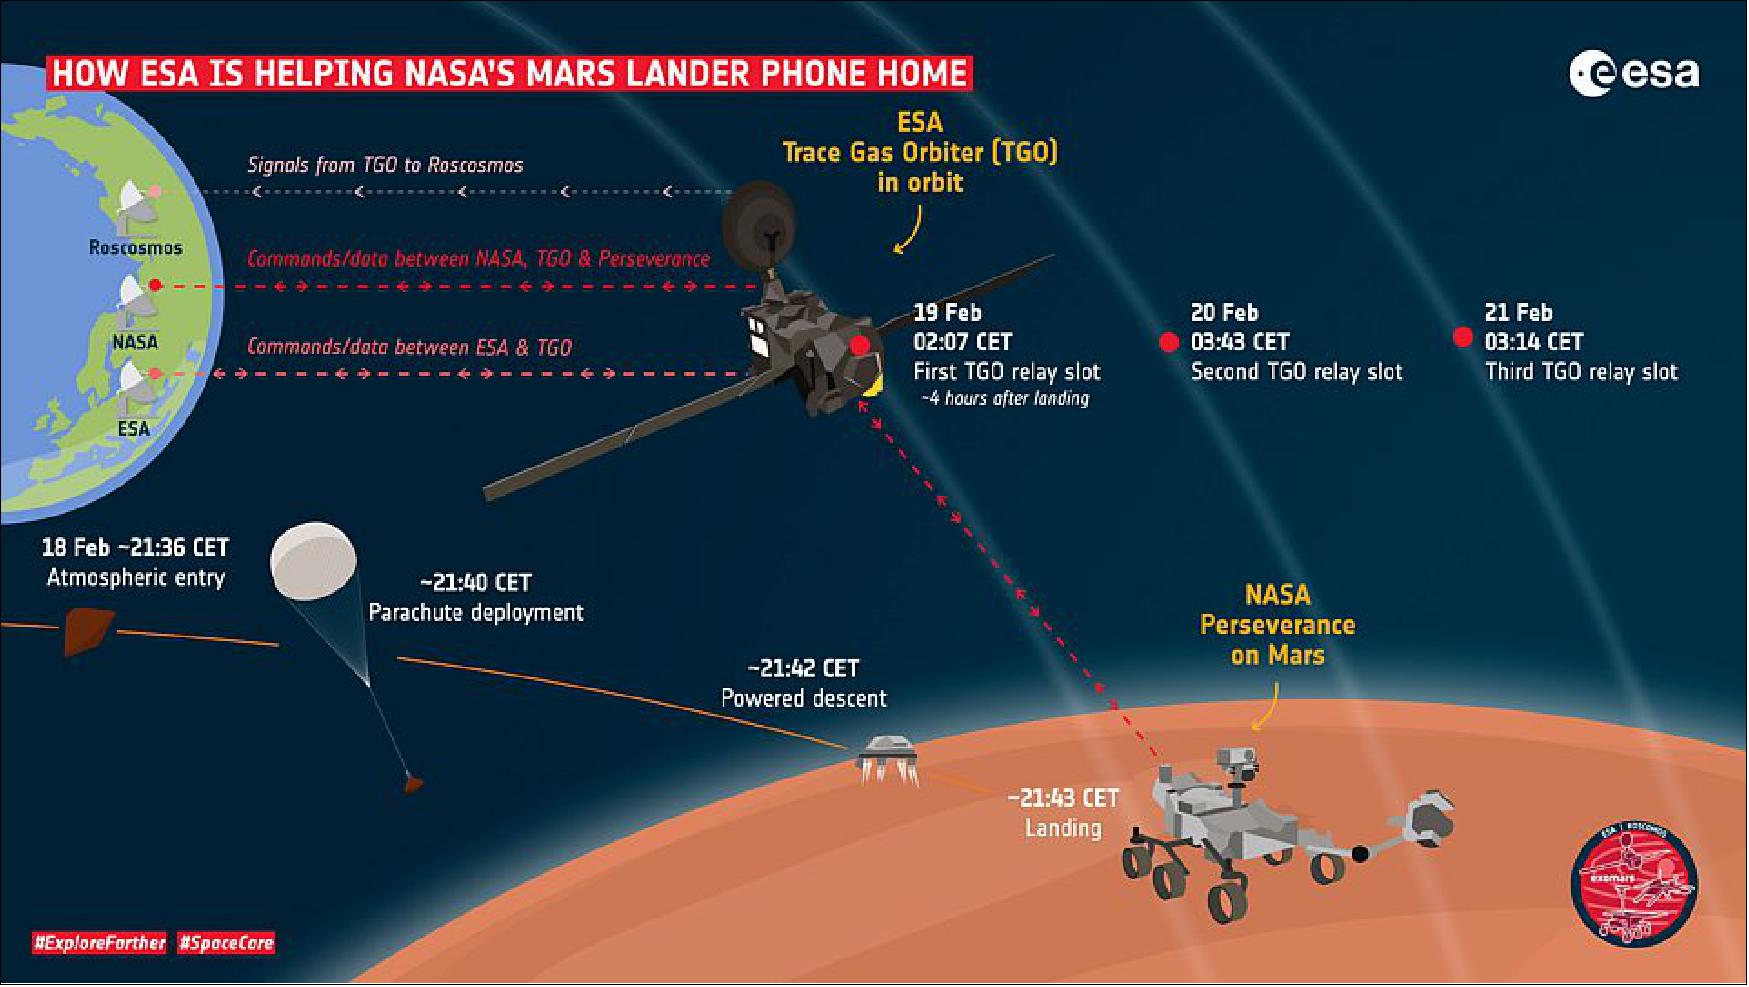 Figure 56: ESA's Trace Gas Orbiter will relay data from NASA's Perseverance rover to ground stations on Earth. The data transmitted by Perseverance in its first hours and days will be vital to the mission. Did the rover land safely? Are all of its systems functional? To ensure that this information gets to the engineers on Earth as quickly as possible, TGO and NASA’s mars orbiters will be able to communicate with deep space ground stations on Earth almost twenty four hours a day, seven days a week for the first two weeks after landing. ESA’s ground station network will provide roughly 14 hours a day of this ‘low-latency’ coverage. - “TGO will provide low-latency data relay support to Perseverance during this period, and continue to provide routine relay support afterwards,” says ESA’s Peter Schmitz, TGO Spacecraft Operations Manager. “Our first relay session with TGO will start at 02:07 CET on 19 February, just four hours after landing.”- The Trace Gas Orbiter is the first of two missions of ESA’s ExoMars programme that is attempting to determine whether life has ever existed on Mars. TGO arrived at Mars in October 2016 and is conducting a detailed study of the atmosphere and mapping signatures of water below the planet’s surface. The orbiter is operated from ESA’s European Space Operations Centre in Darmstadt, Germany and mission controllers already have a lot of experience relaying data from existing Mars landers (image credit: ESA)